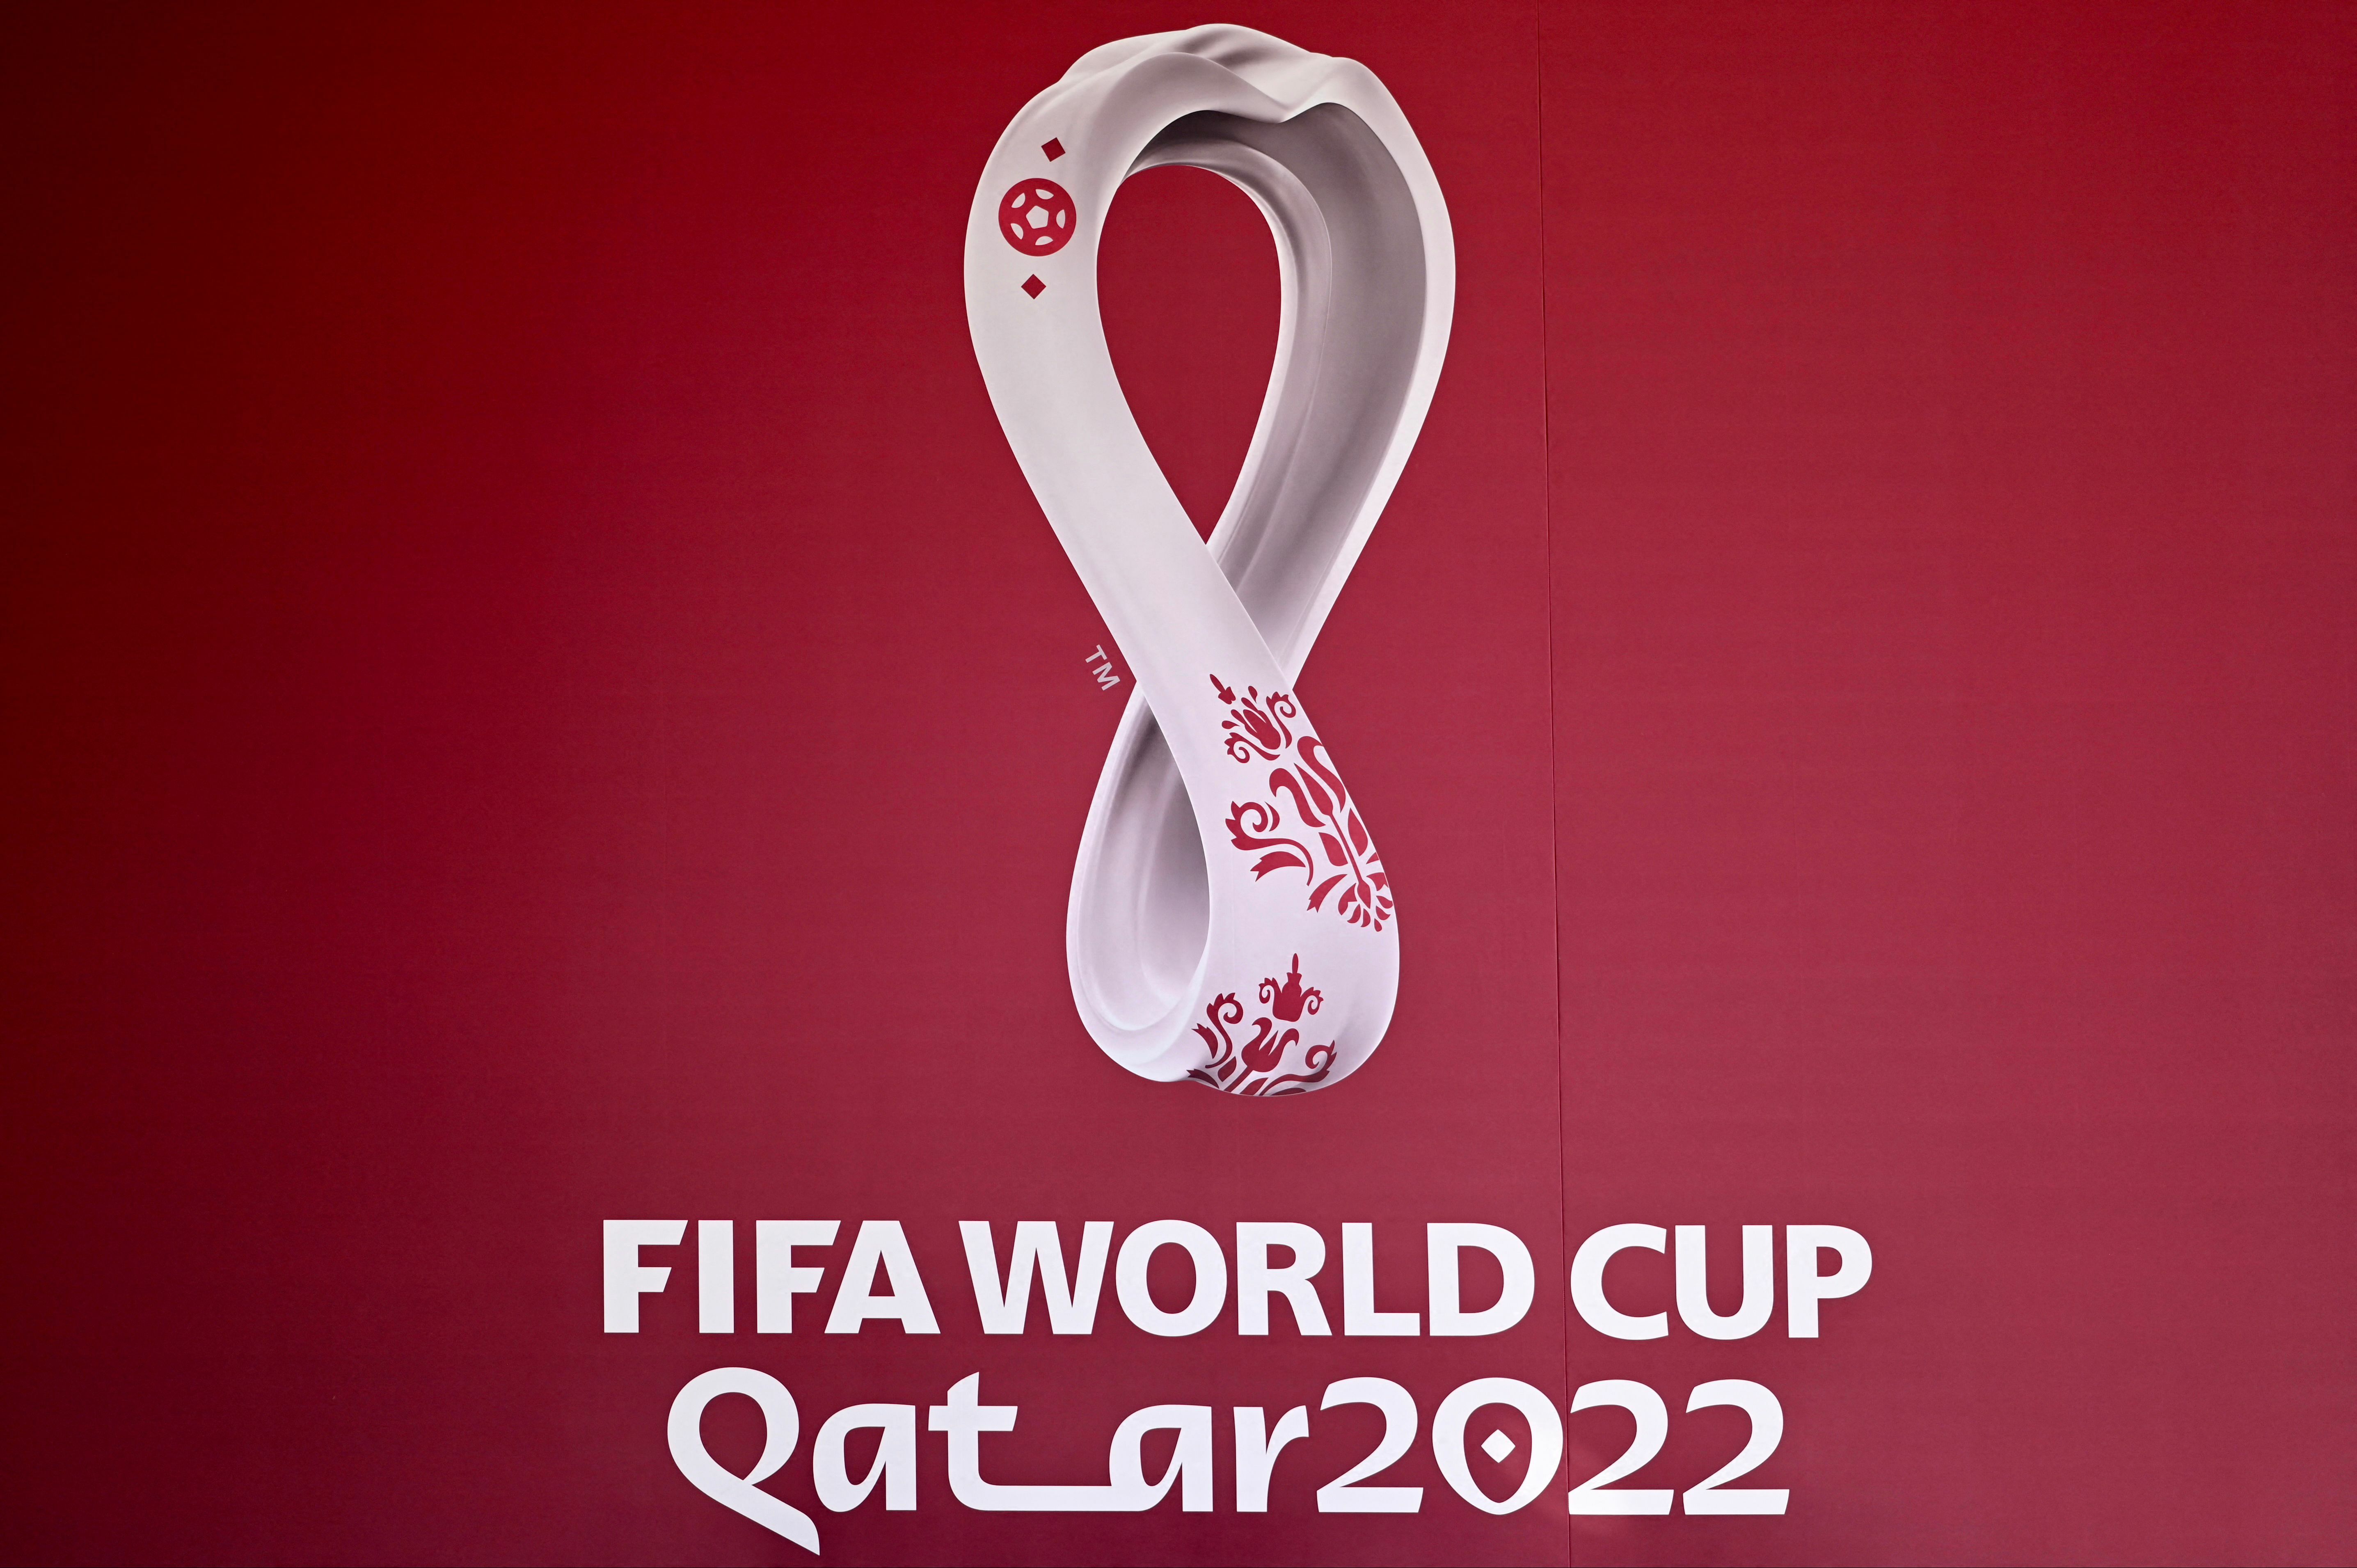 The 2022 World Cup logo